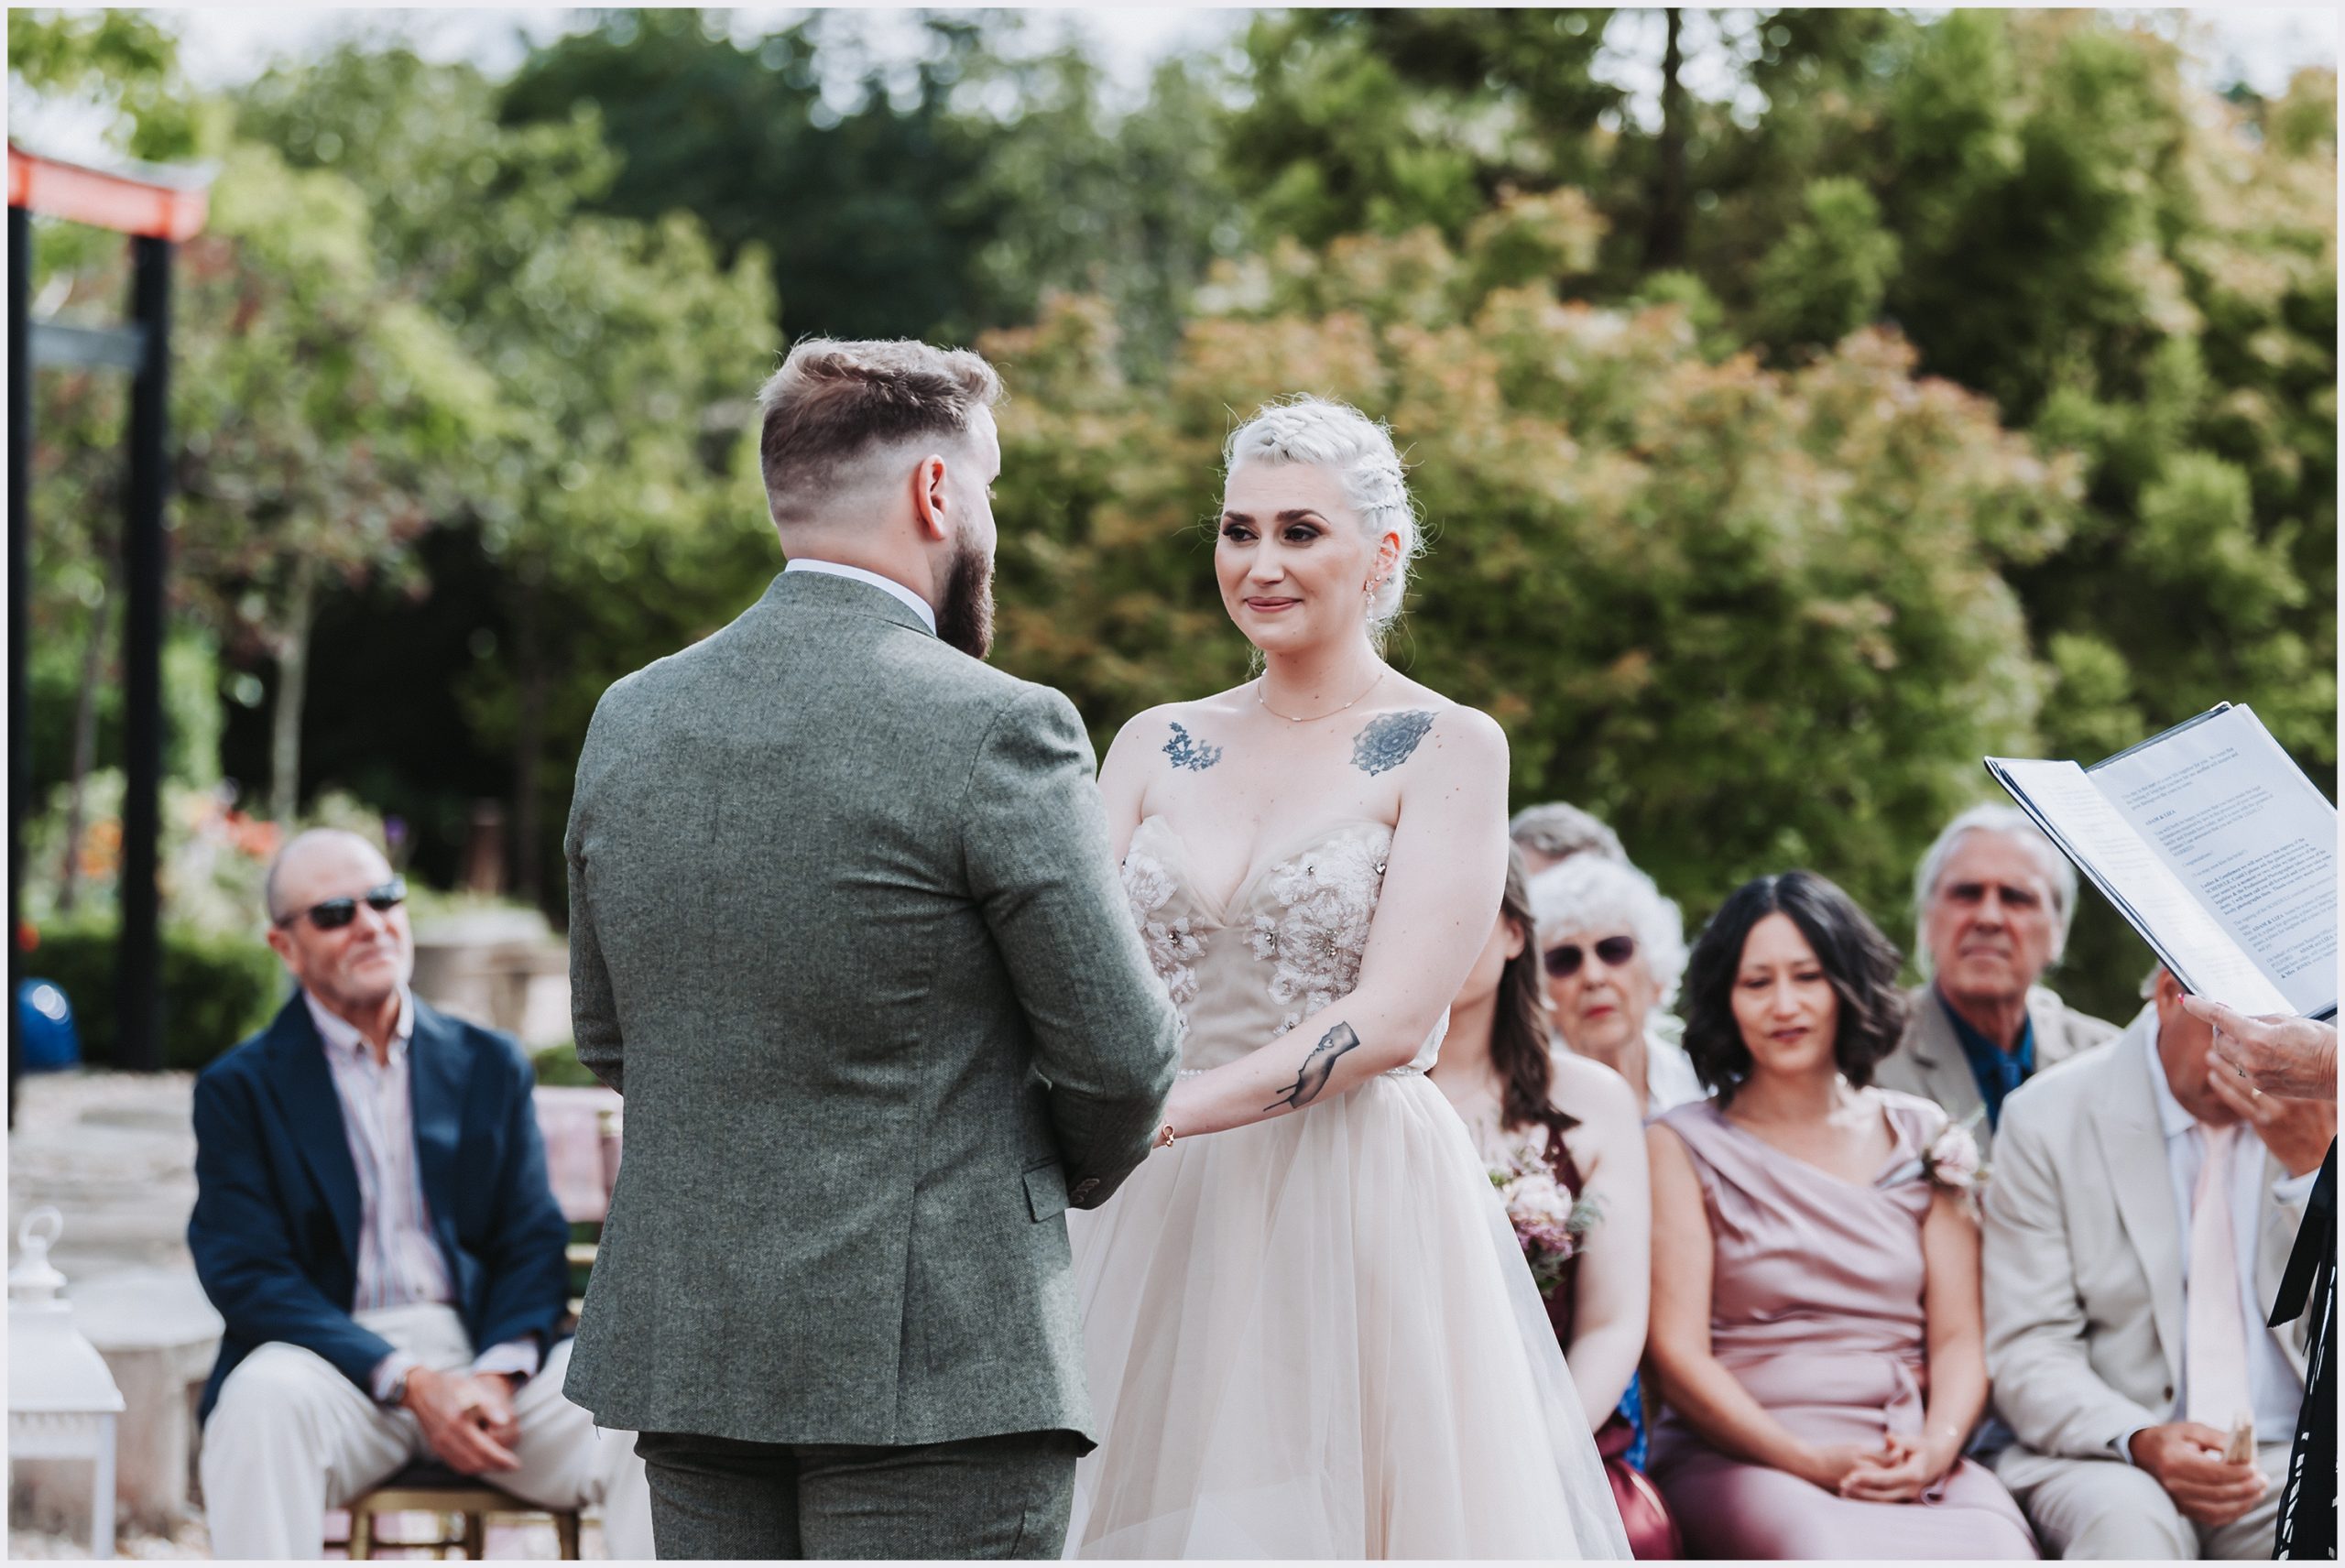 An emotional bride looks intently at her fiance during their outdoor wedding ceremony at The Grosvenor Pulford Hotel and Spa.  Guests are in the background smiling as they listen to the vows.  Image captured by Helena Jayne Photography.